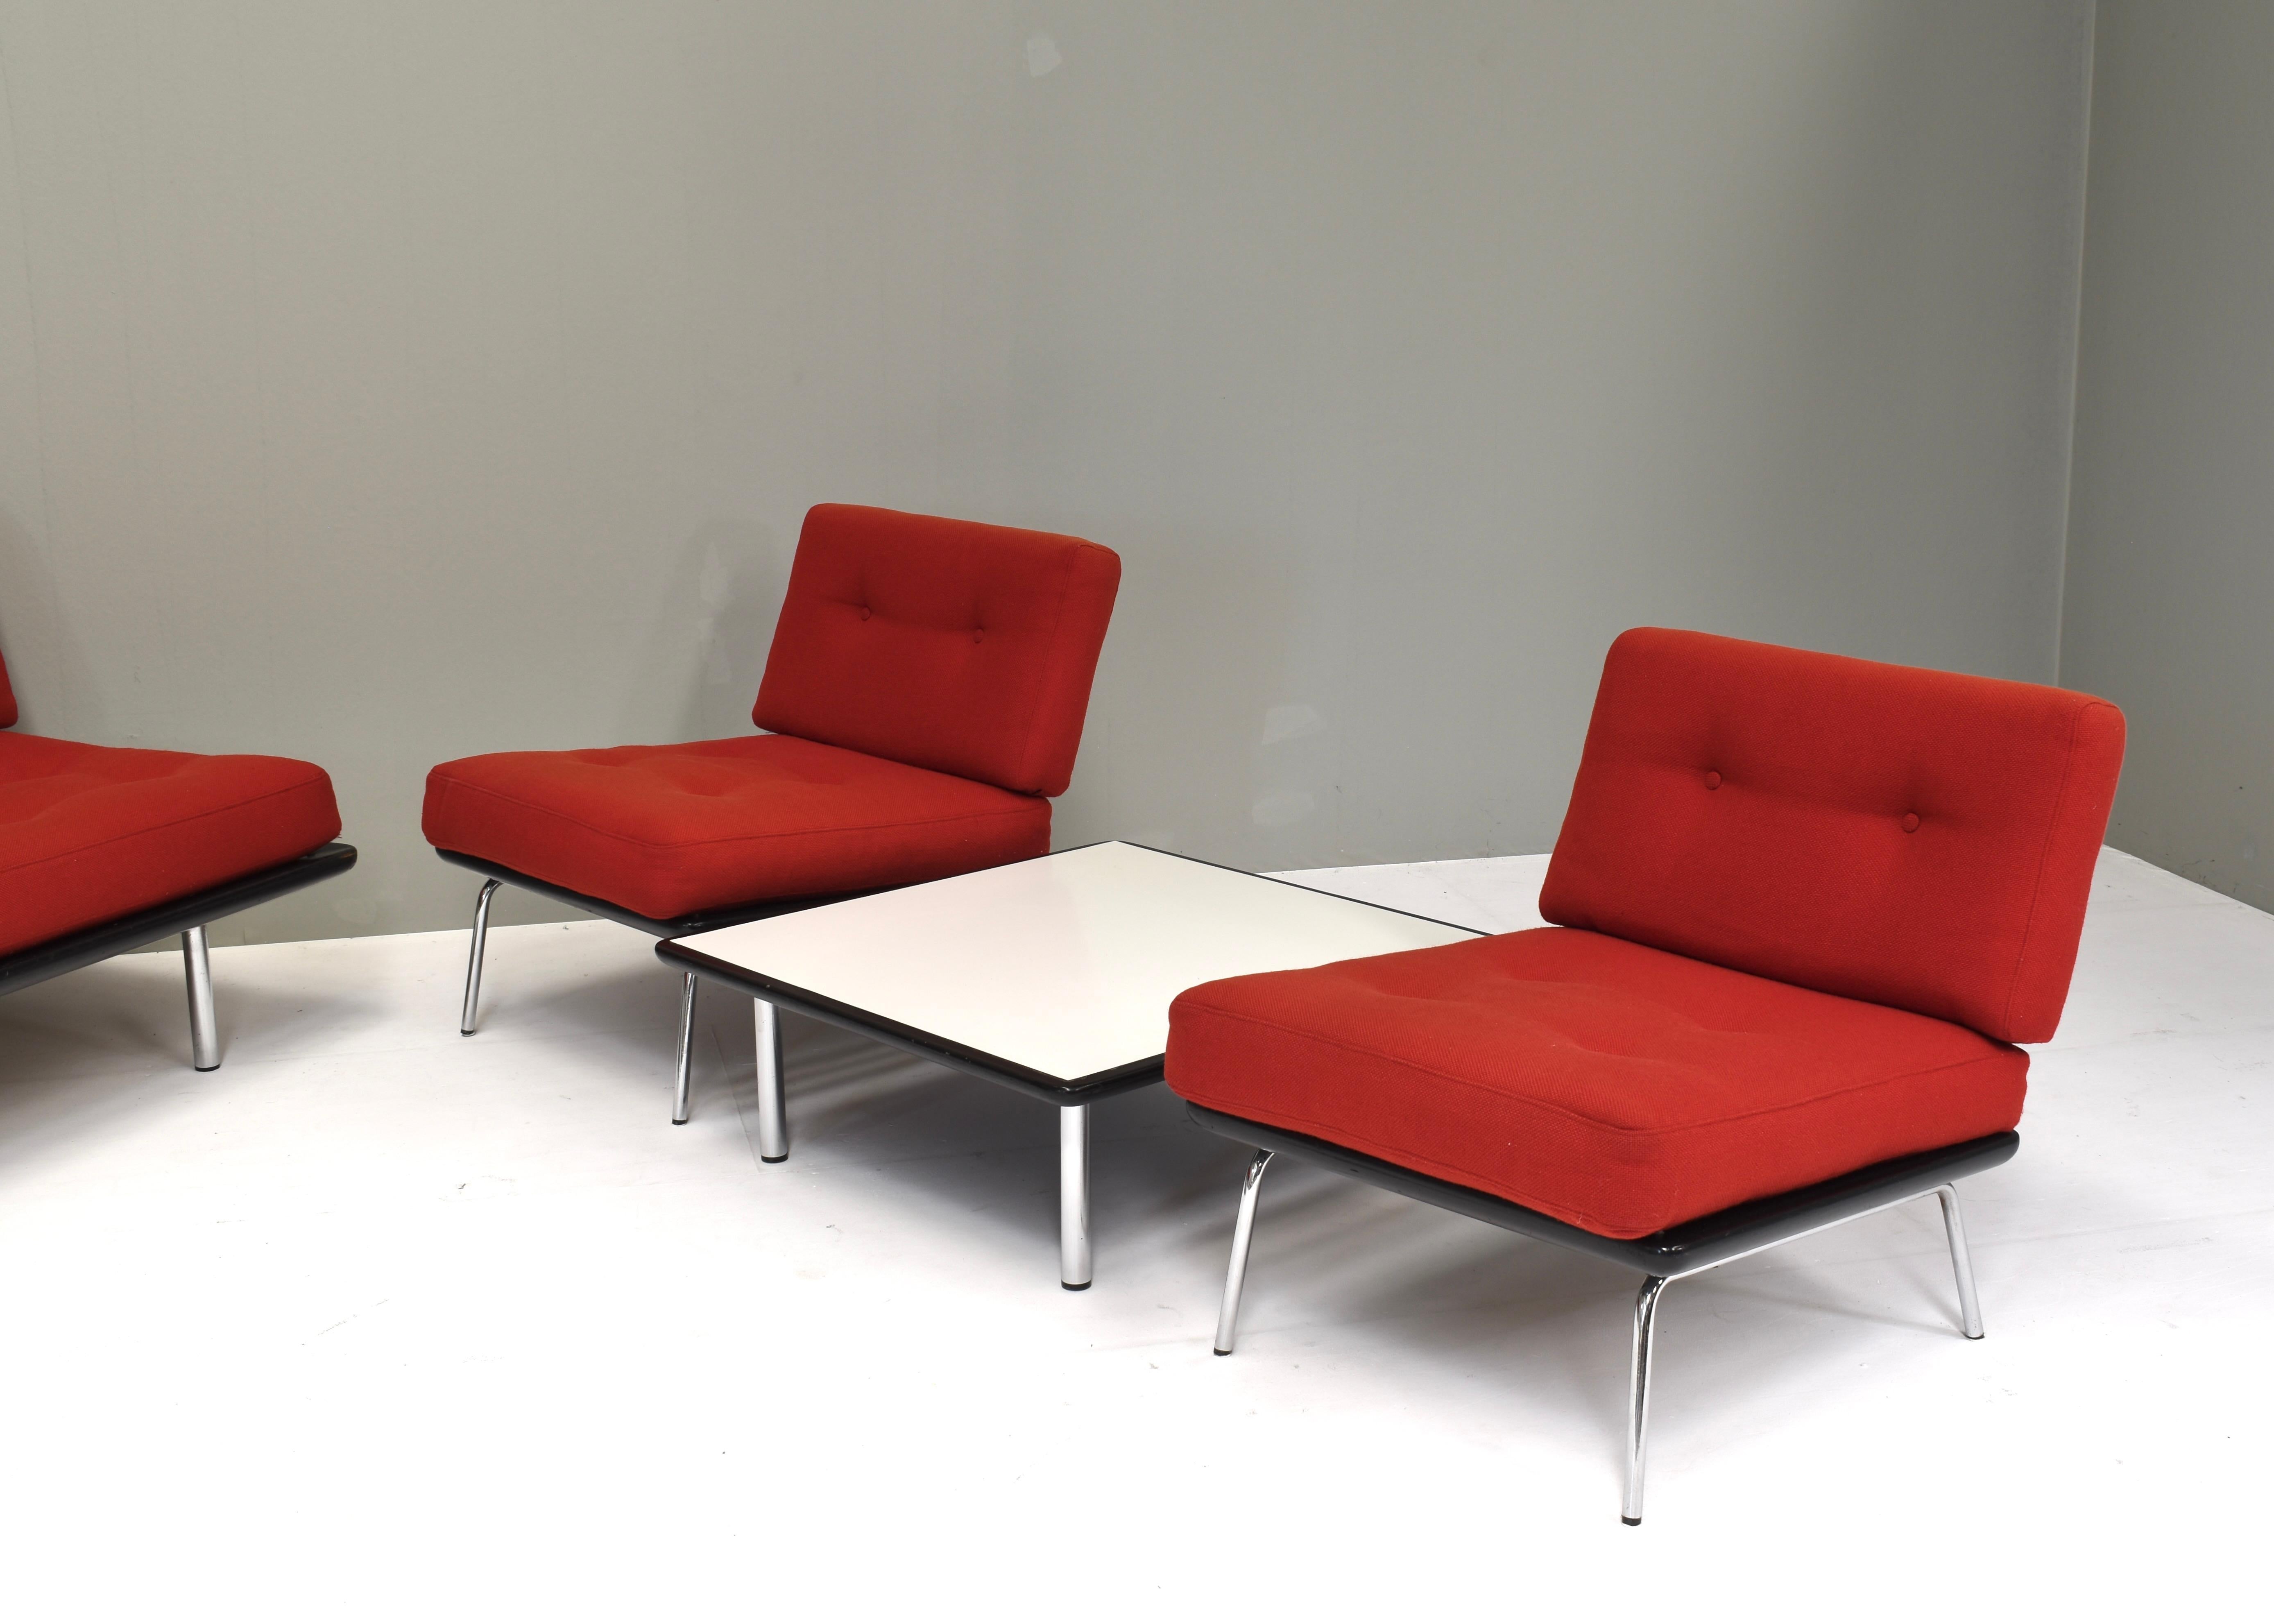 Mid-Century Modern Seating Set by or in the Style of Martin Visser or Who Liang Ie – 1960s